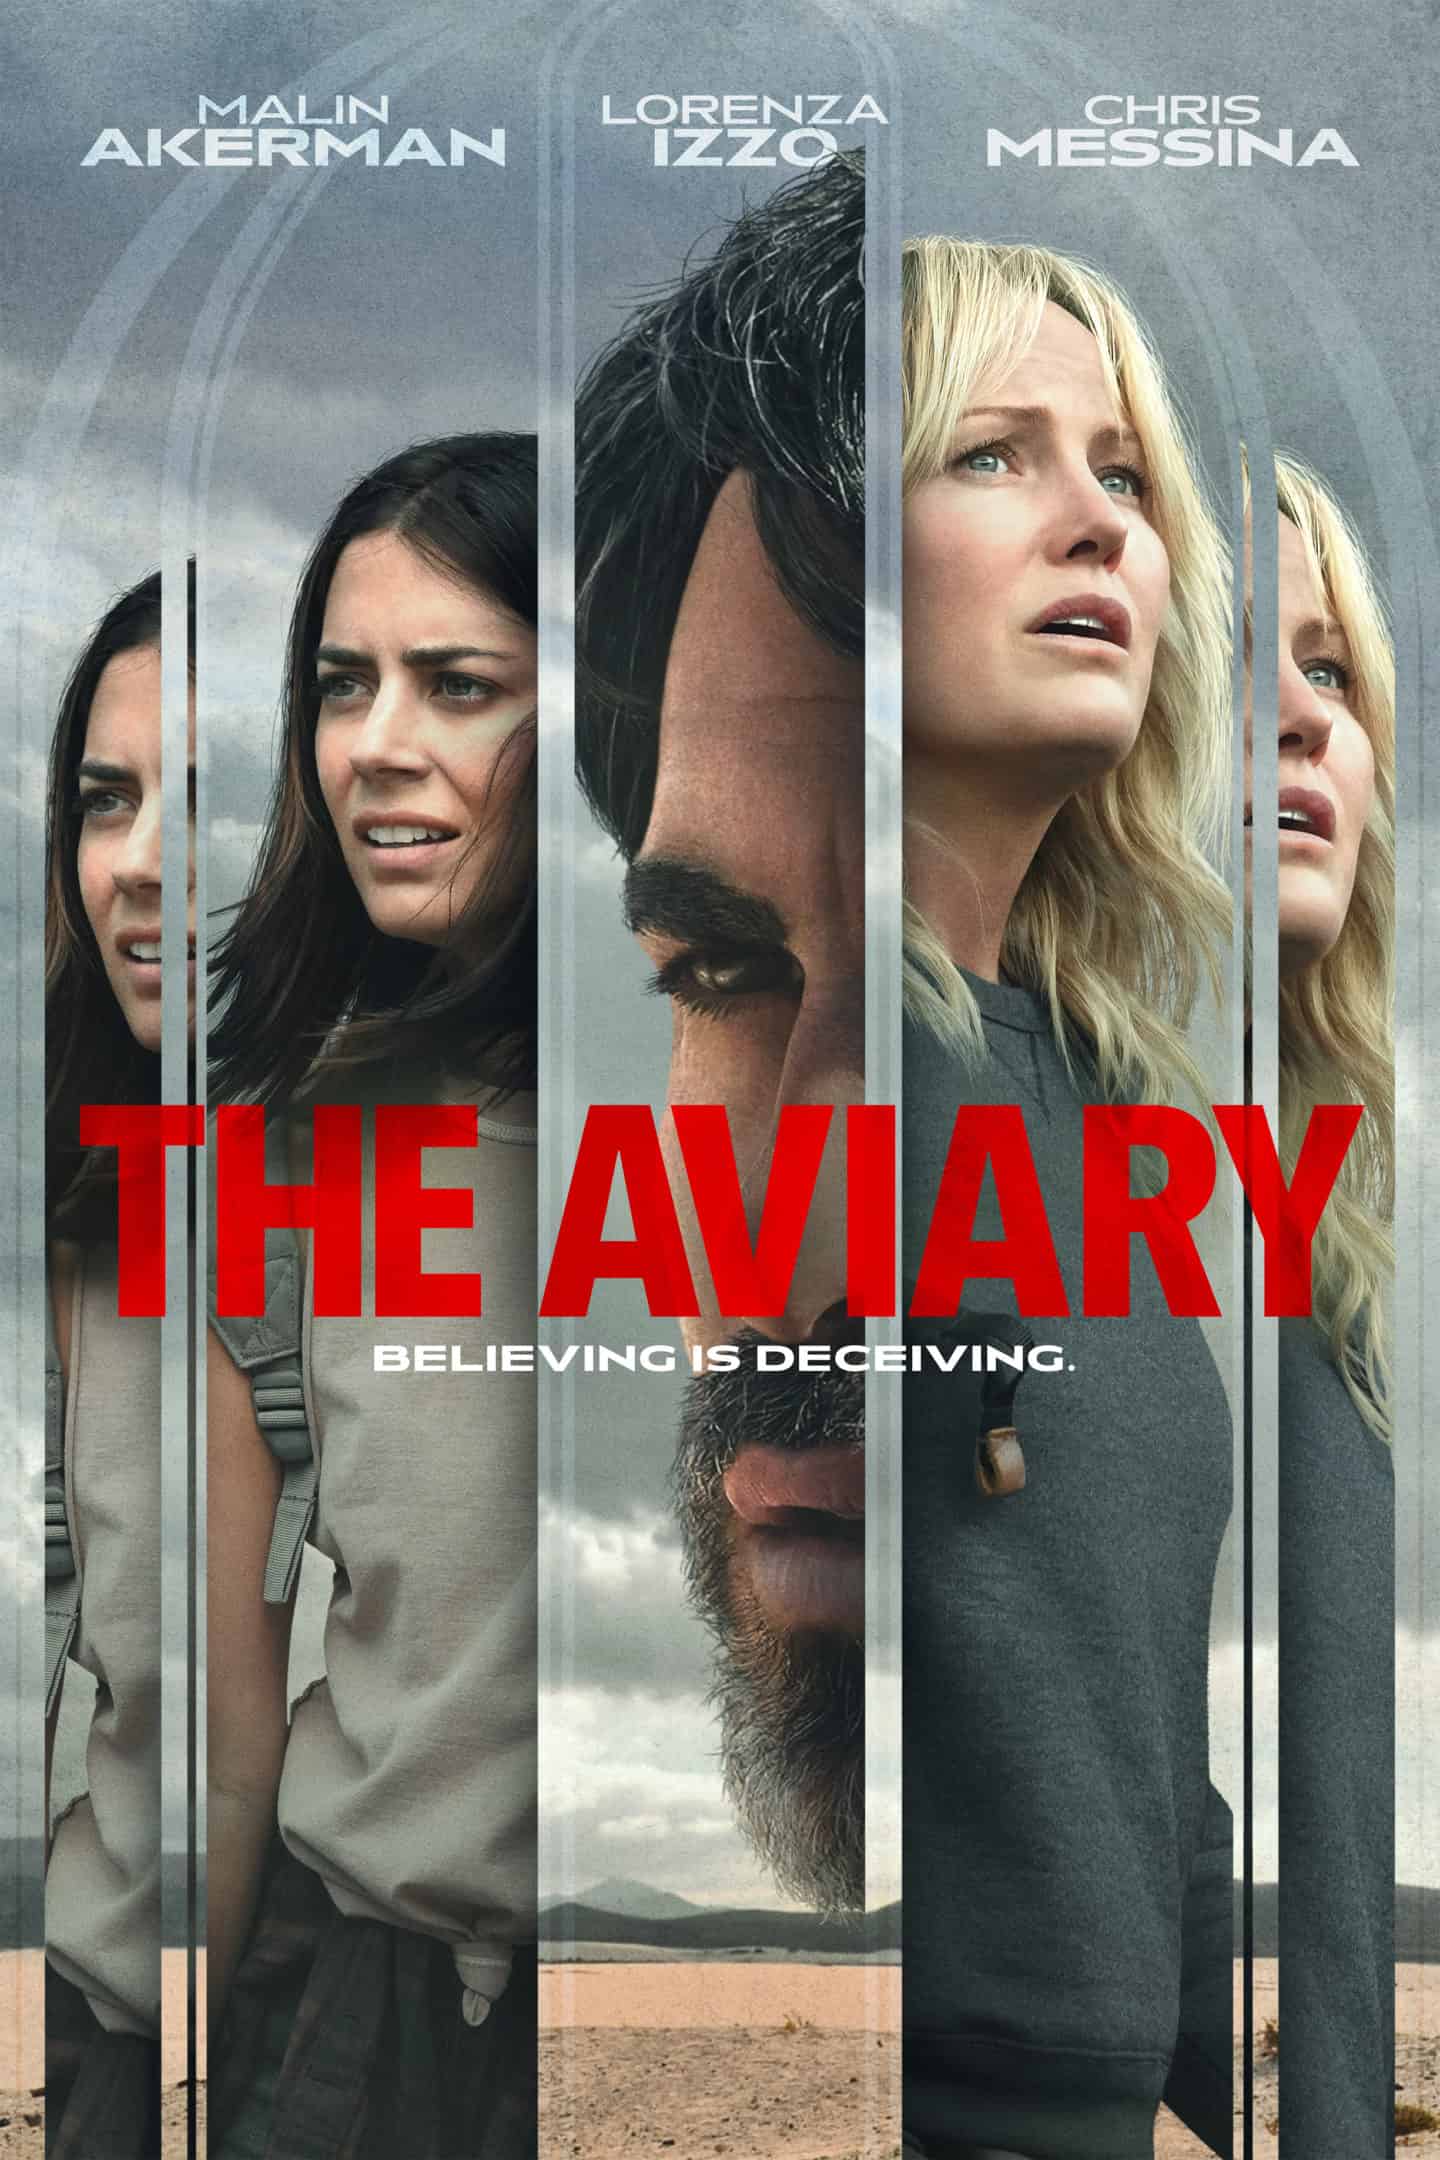 The Aviary comes to Digital and On Demand on April 29th 17